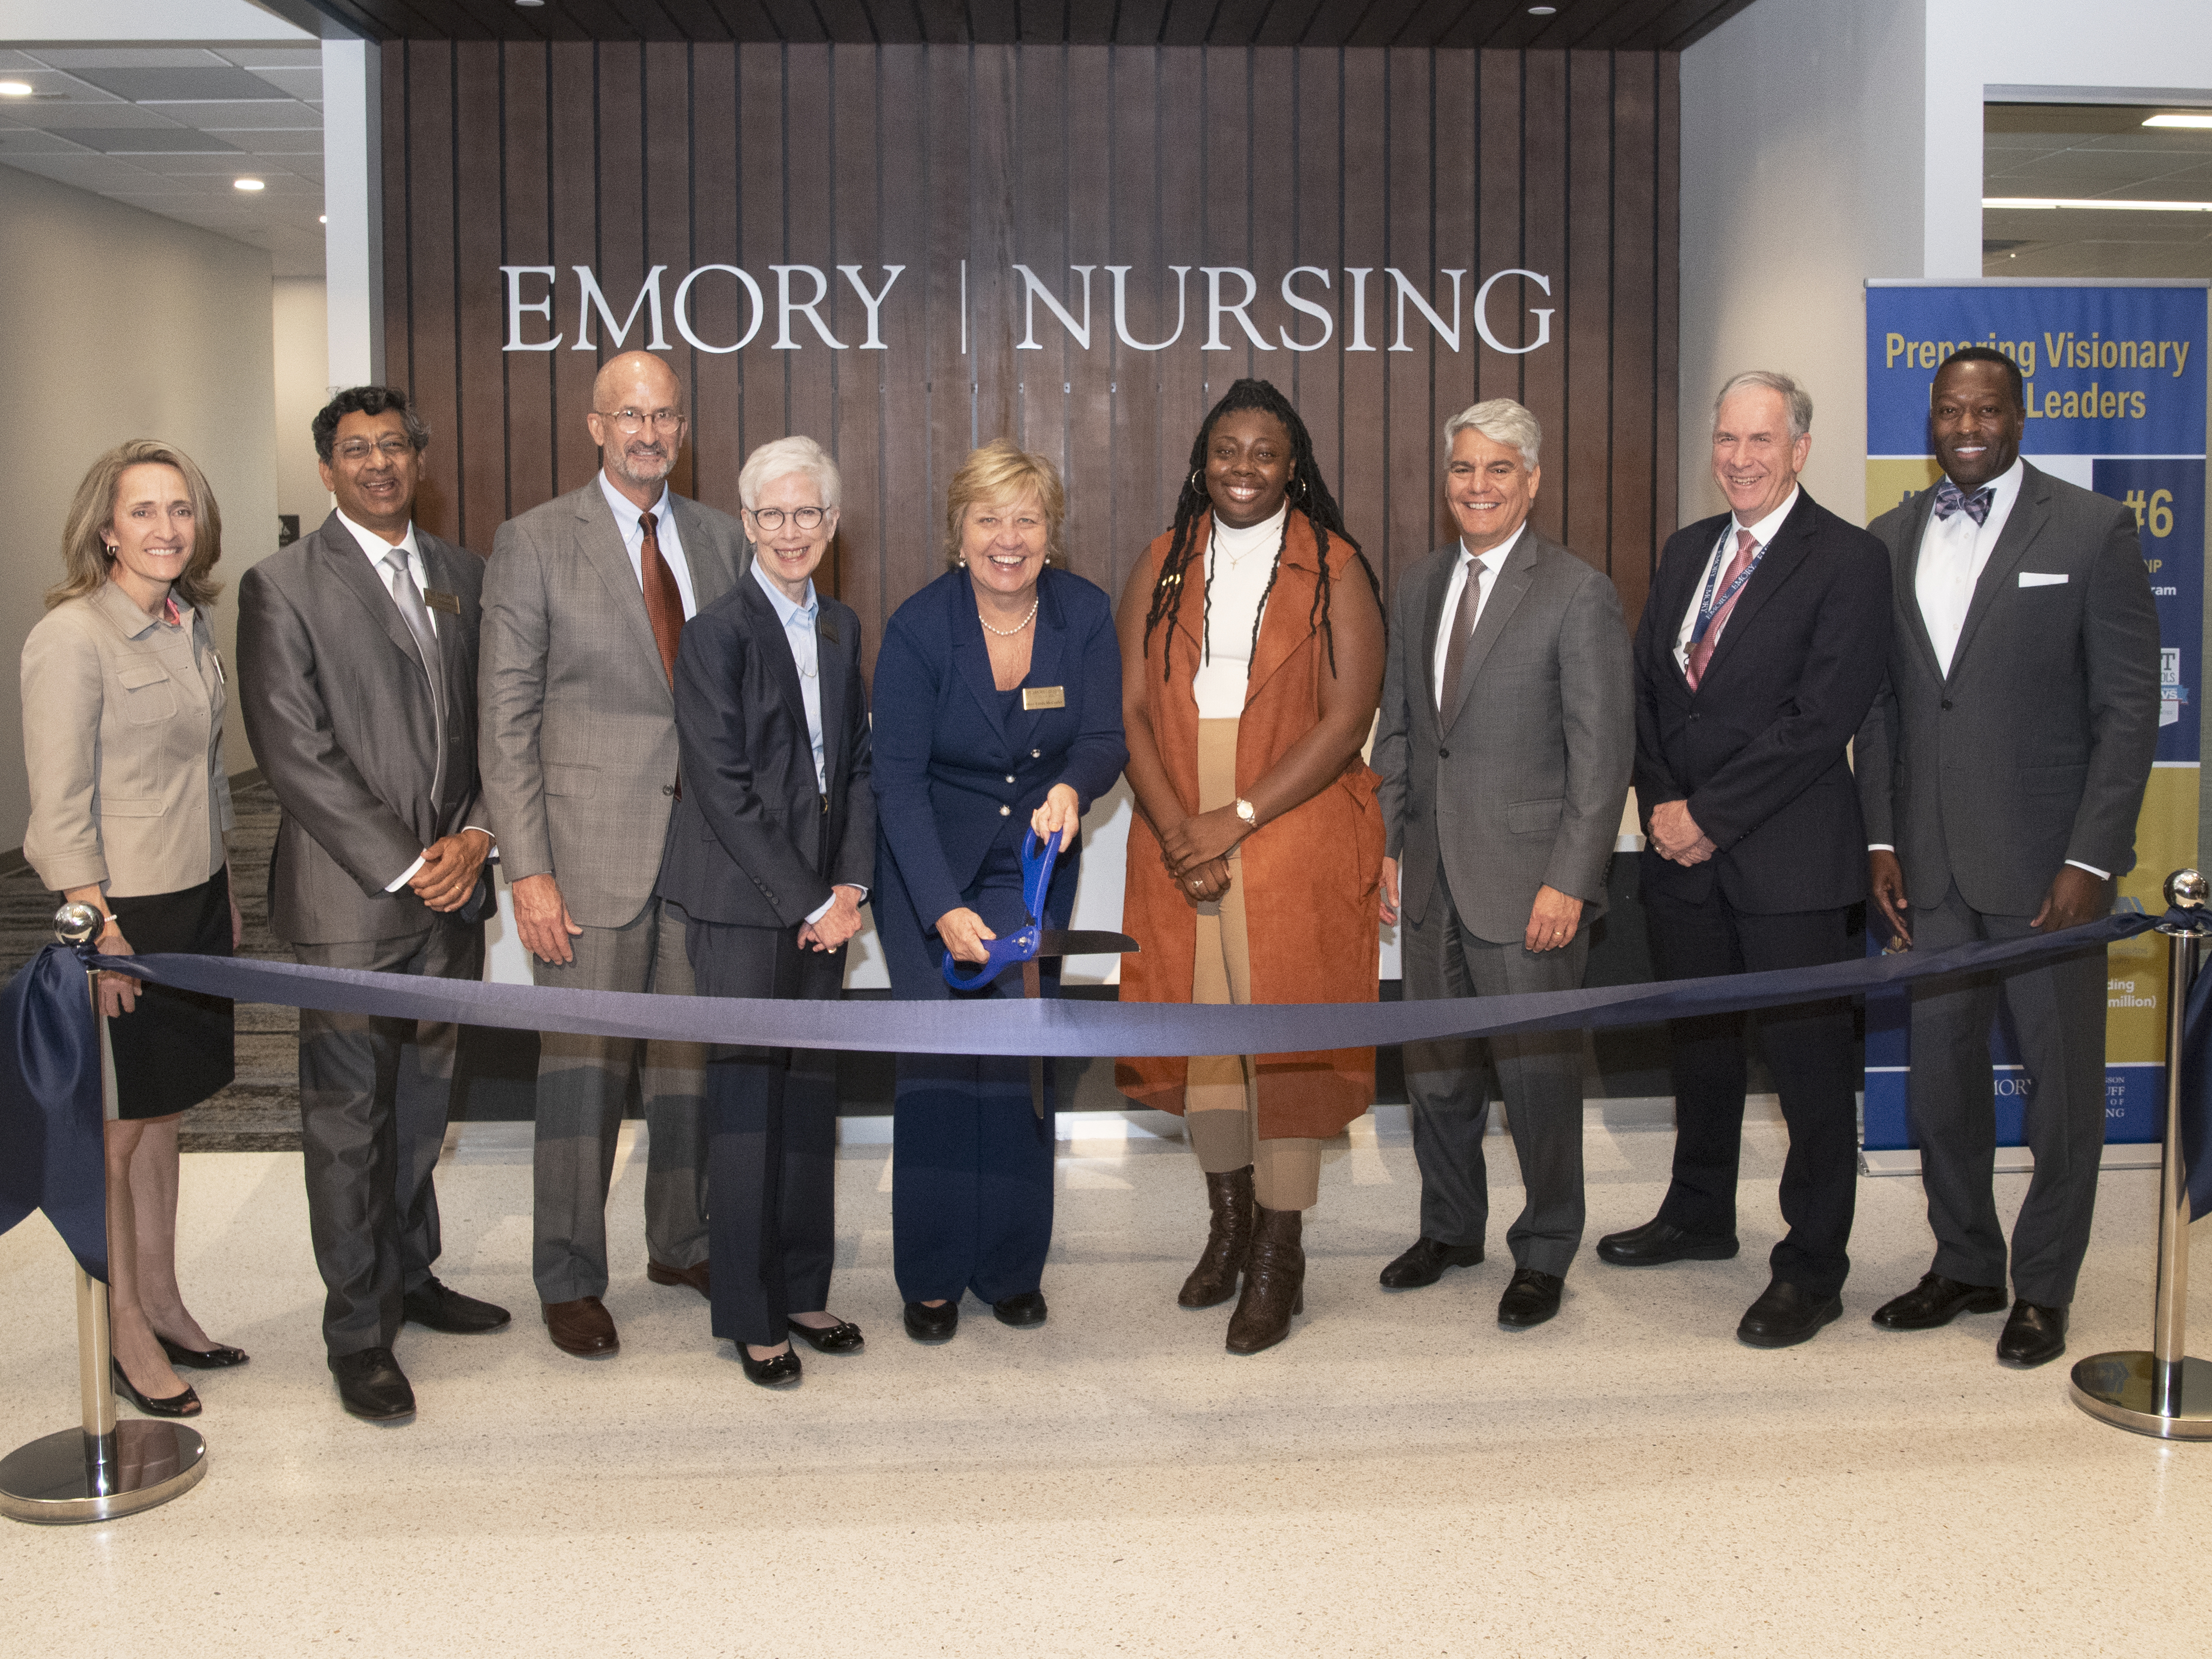 Emory and Decatur officials prepare to cut the ribbon to open the Emory Nursing Learning Center